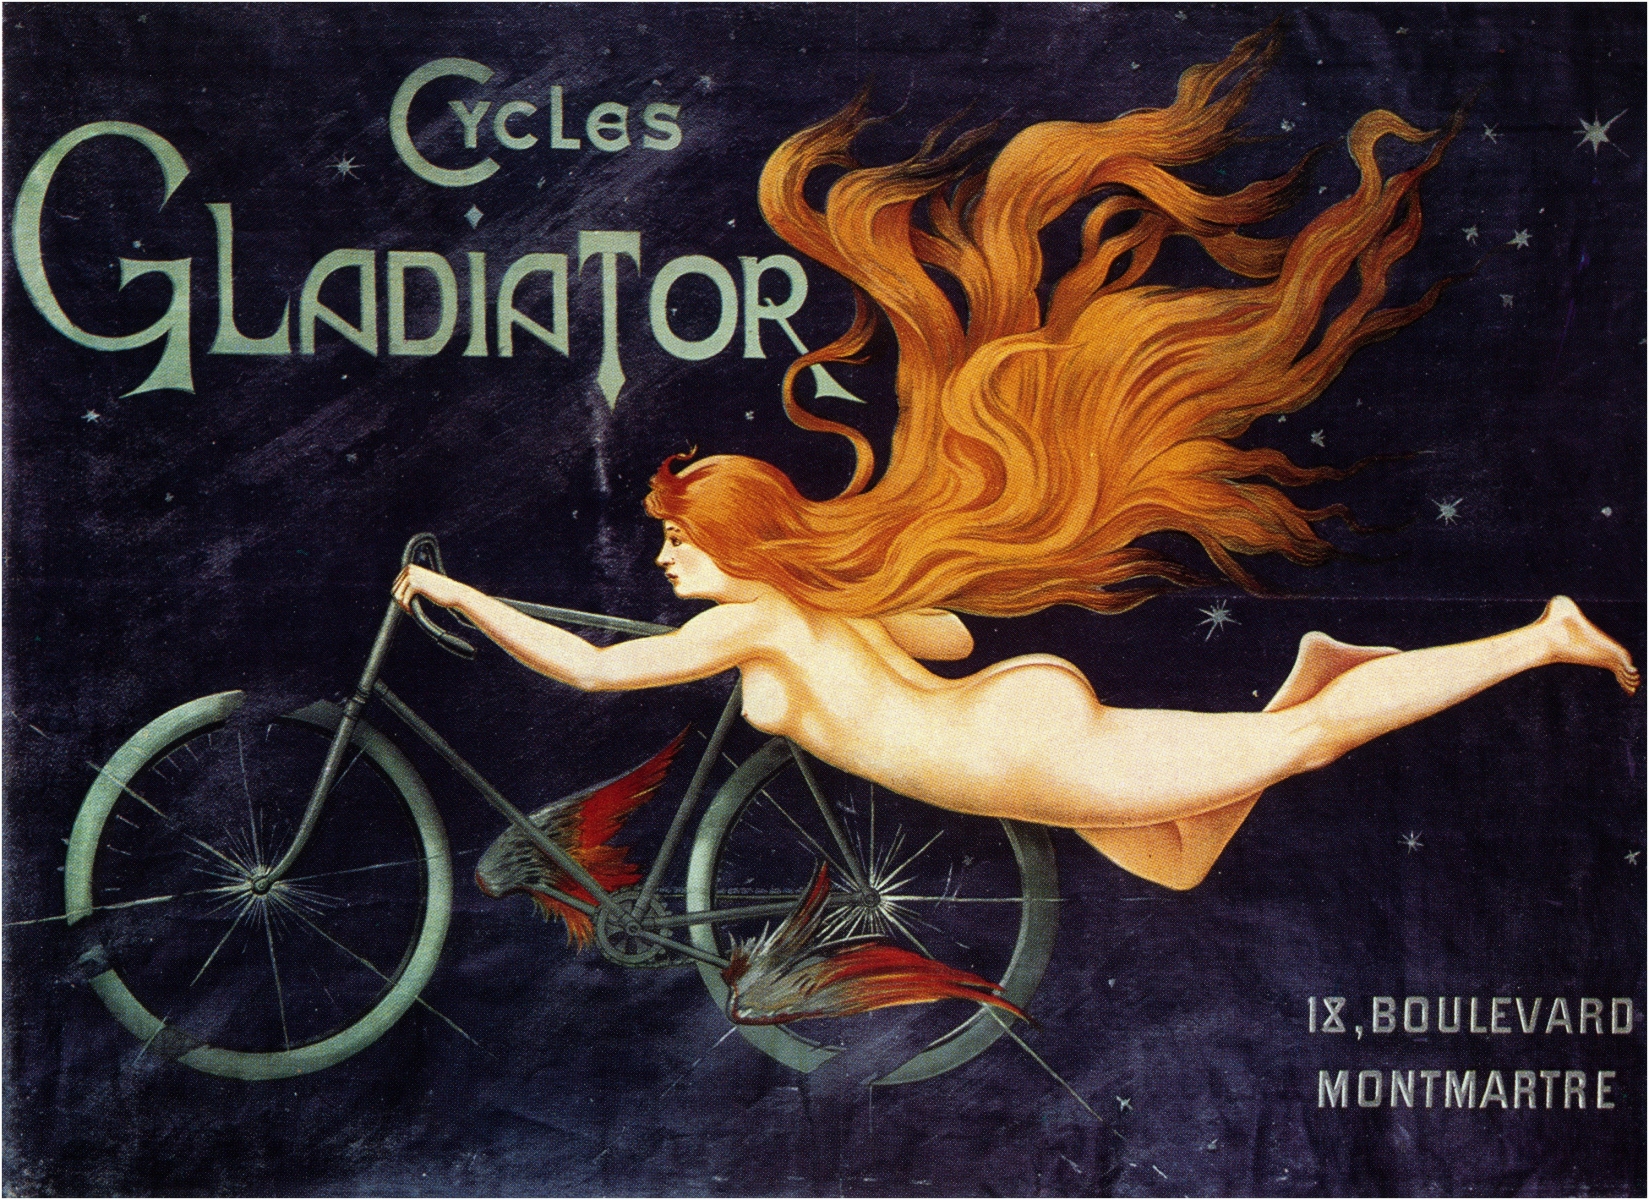 Cycles-Gladiator-18-Boulevard-Montmartre-Georges-Massias-1895